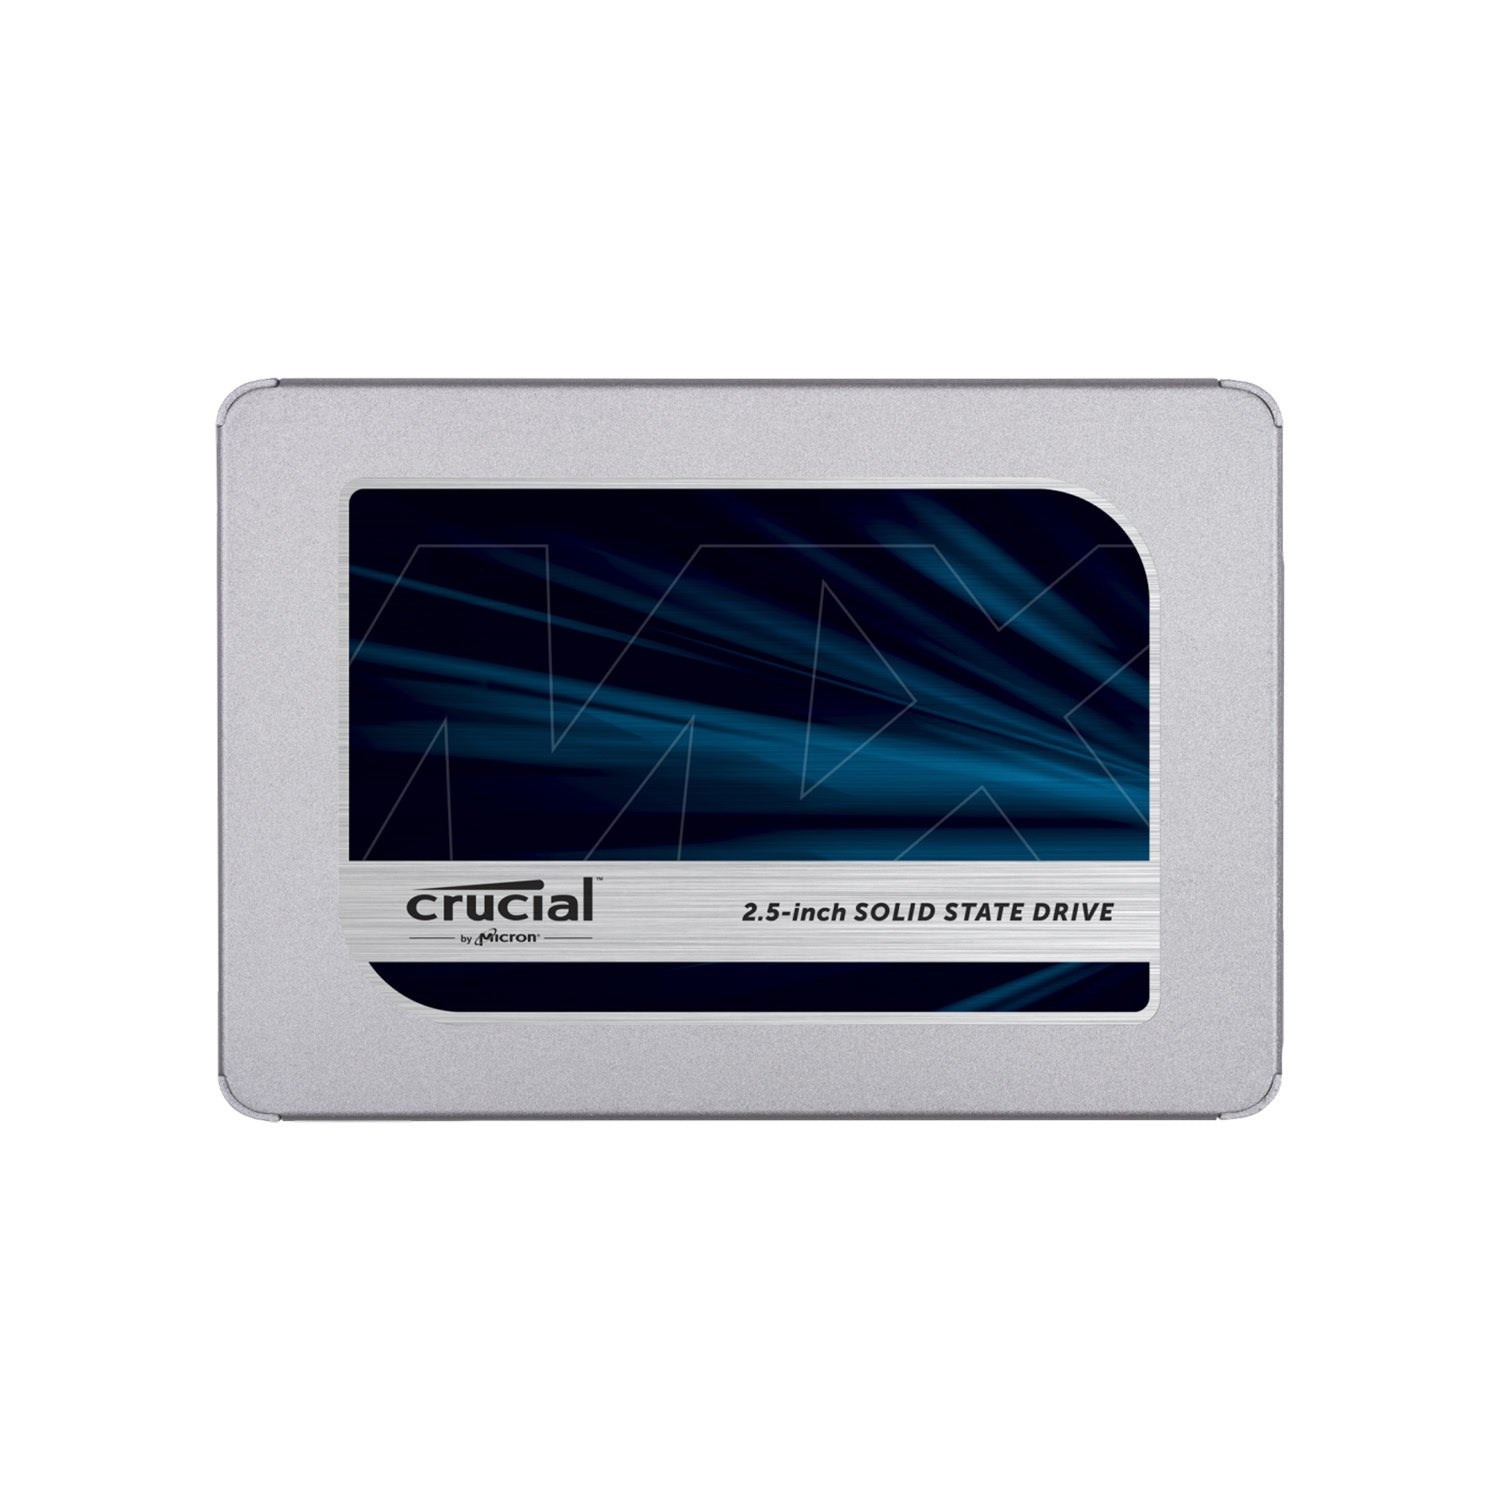 Crucial MX500 2.5" Internal SSD SATA III 6 Gb/s Interface (Solid State Hard Drive) -250GB | Up to 560 MB/s Sequential Read Speed (CT250MX500SSD1)